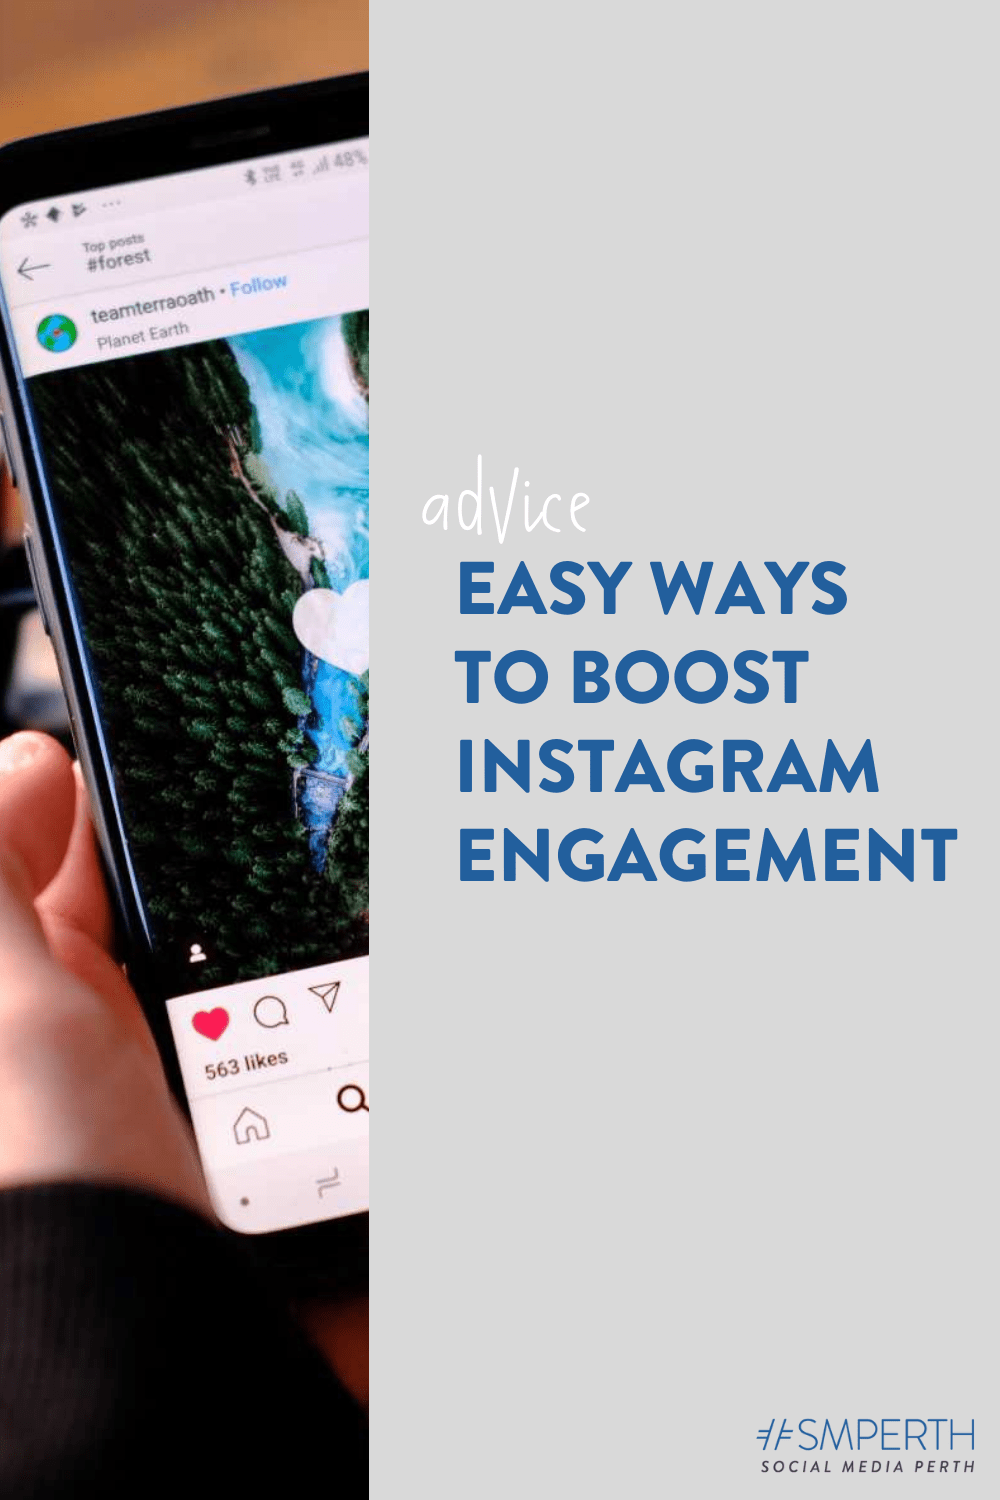 Easy ways to boost Instagram engagement